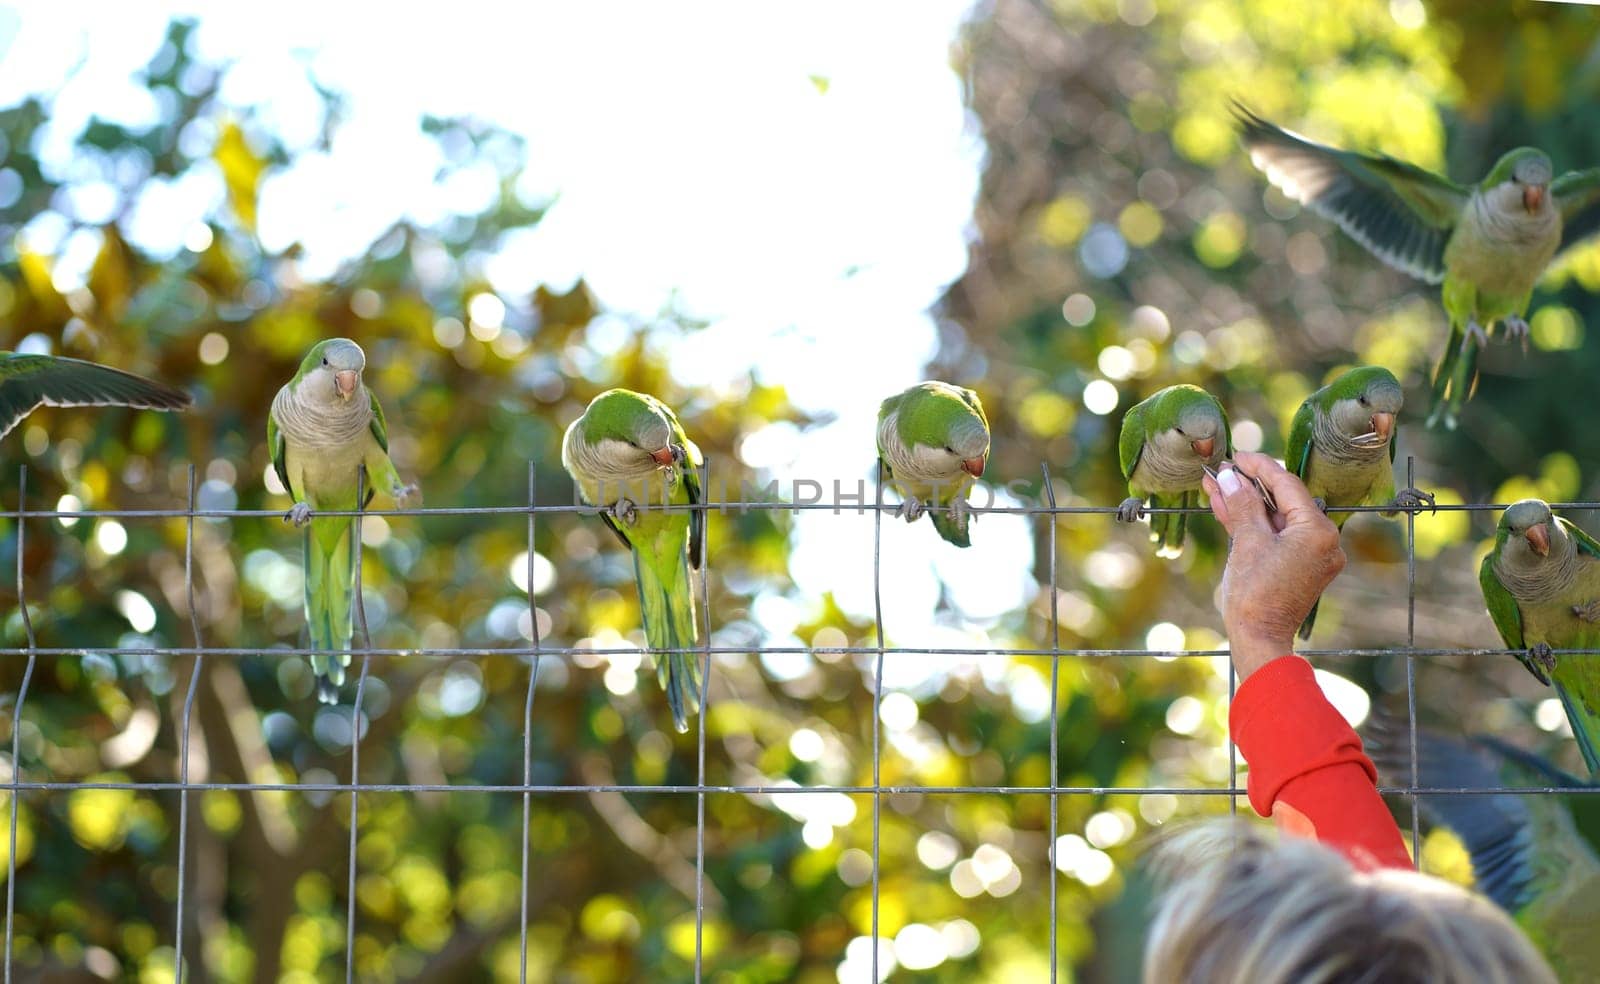 Barcelona. City Park. People feed parrots. Interaction between people and animals in the city. Group of green parakeets on a mesh fence and the hand of a man feeding them by aprilphoto